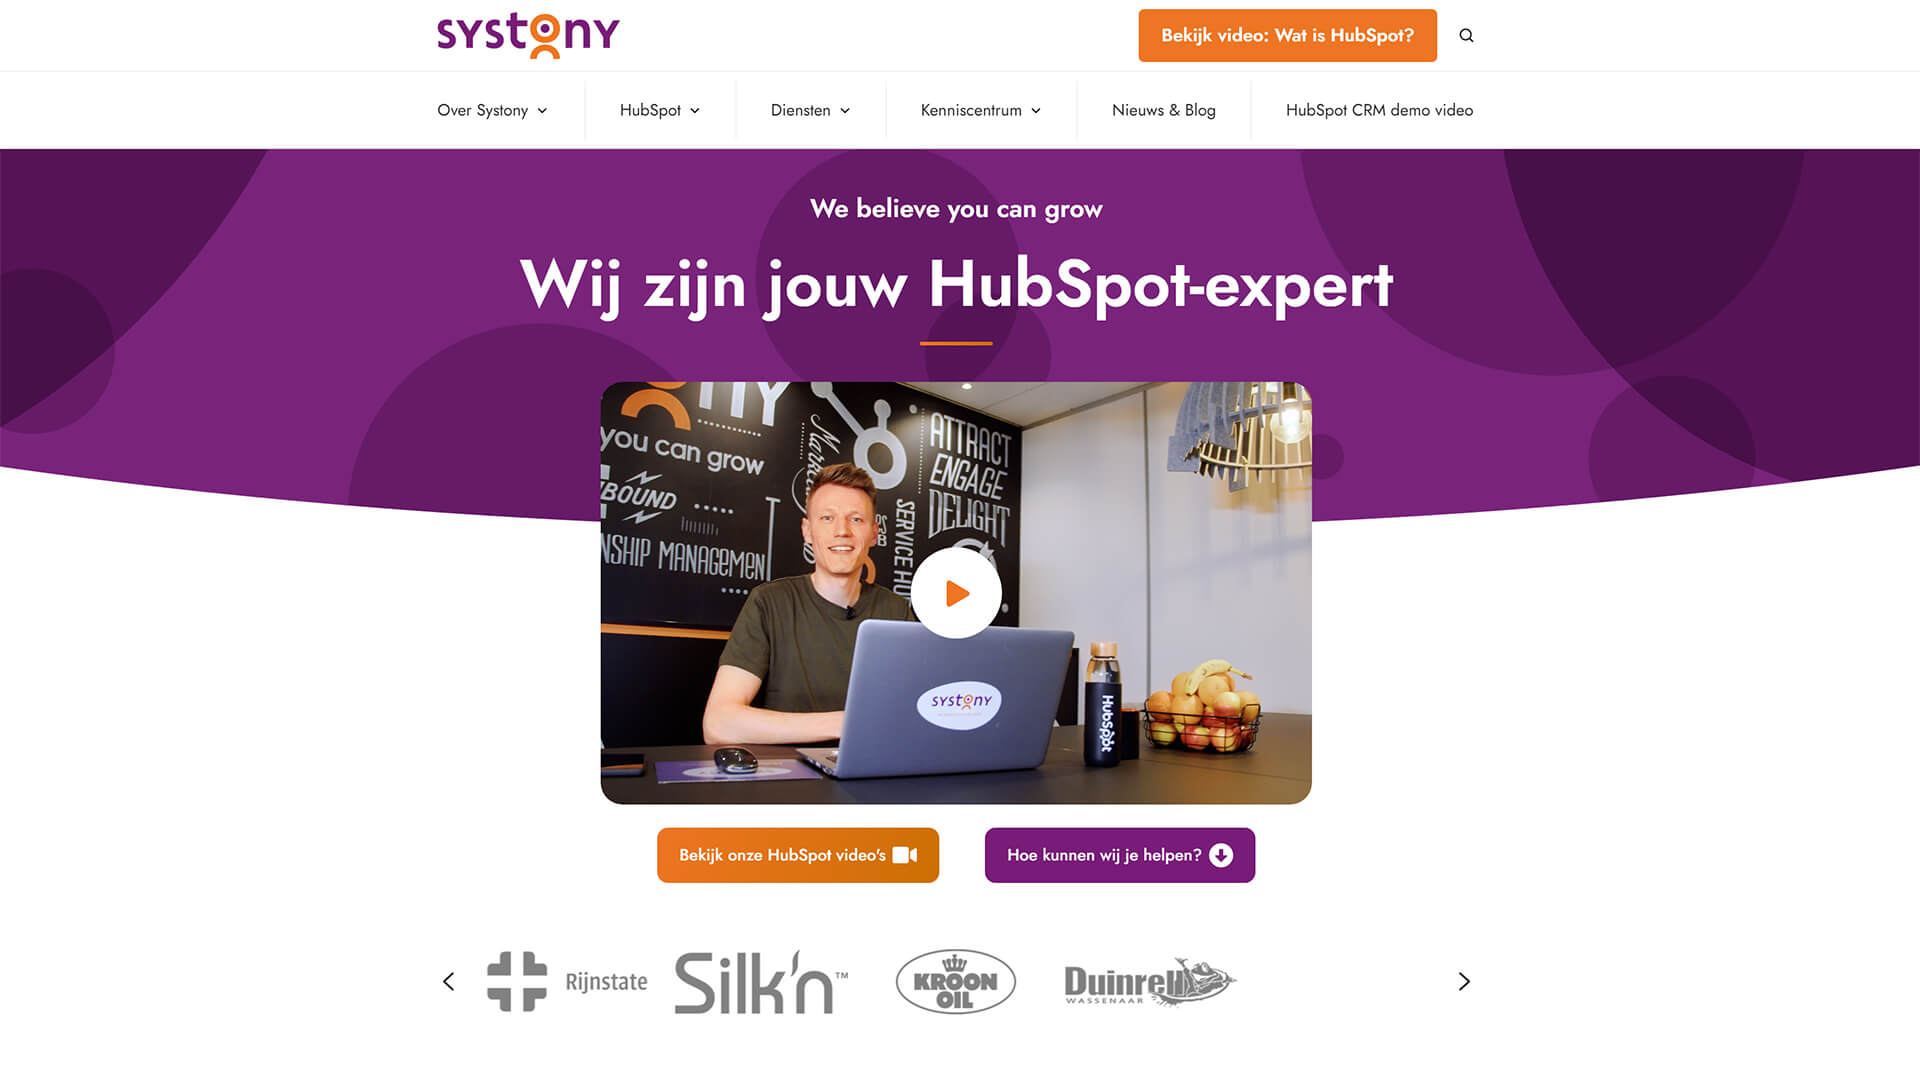 The beautiful systony.nl website created with Act3 on the HubSpot CMS